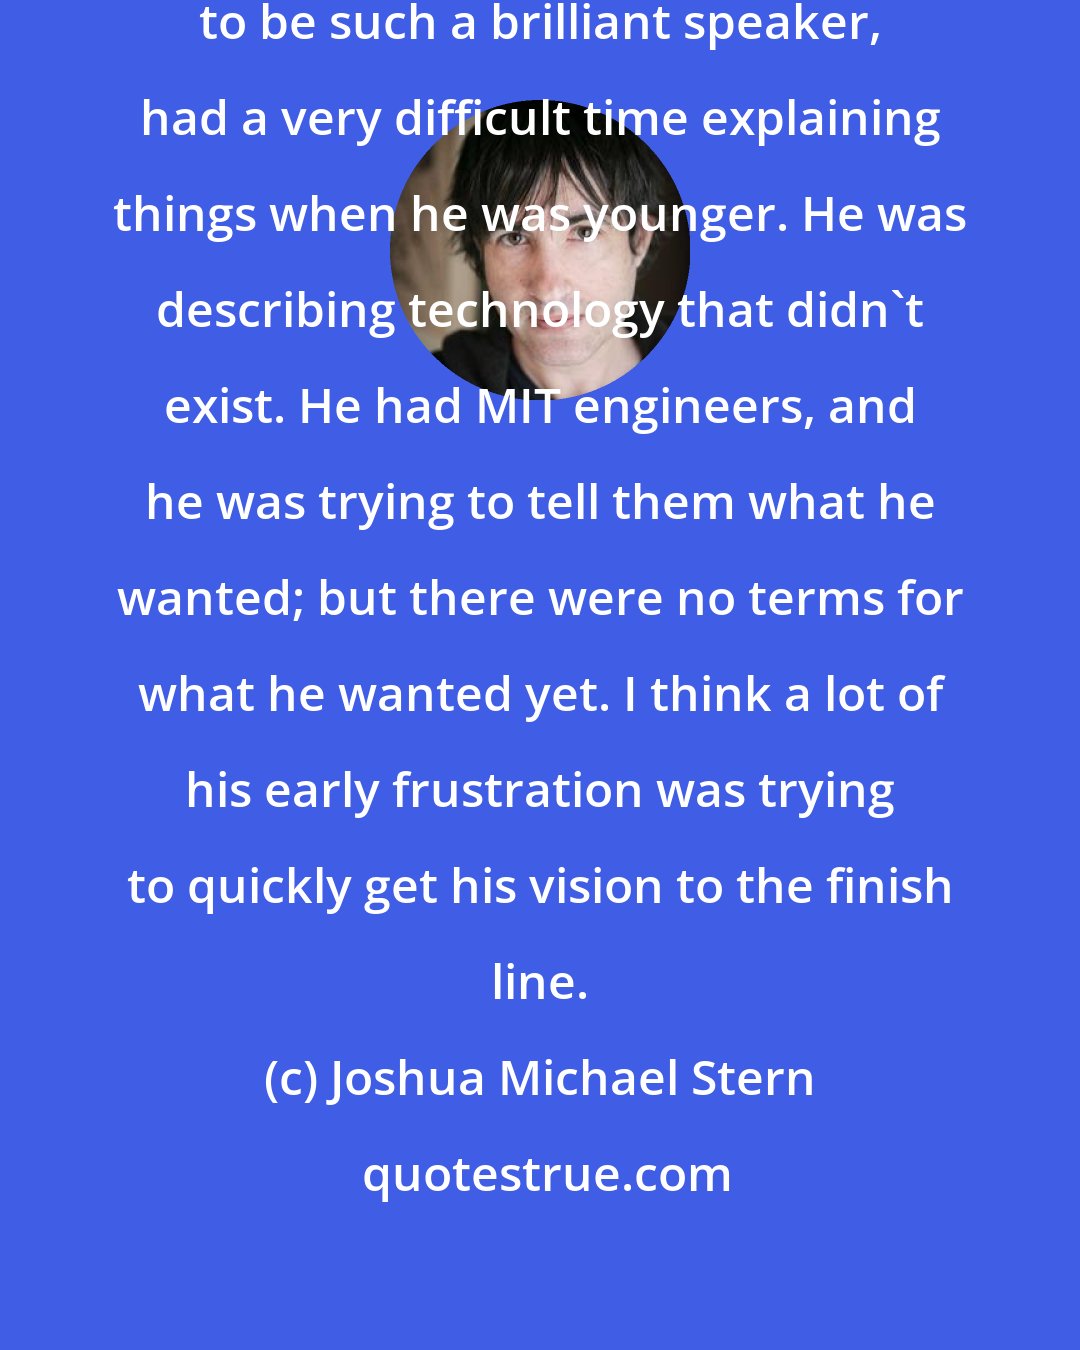 Joshua Michael Stern: It struck me that Steve Jobs, known to be such a brilliant speaker, had a very difficult time explaining things when he was younger. He was describing technology that didn't exist. He had MIT engineers, and he was trying to tell them what he wanted; but there were no terms for what he wanted yet. I think a lot of his early frustration was trying to quickly get his vision to the finish line.